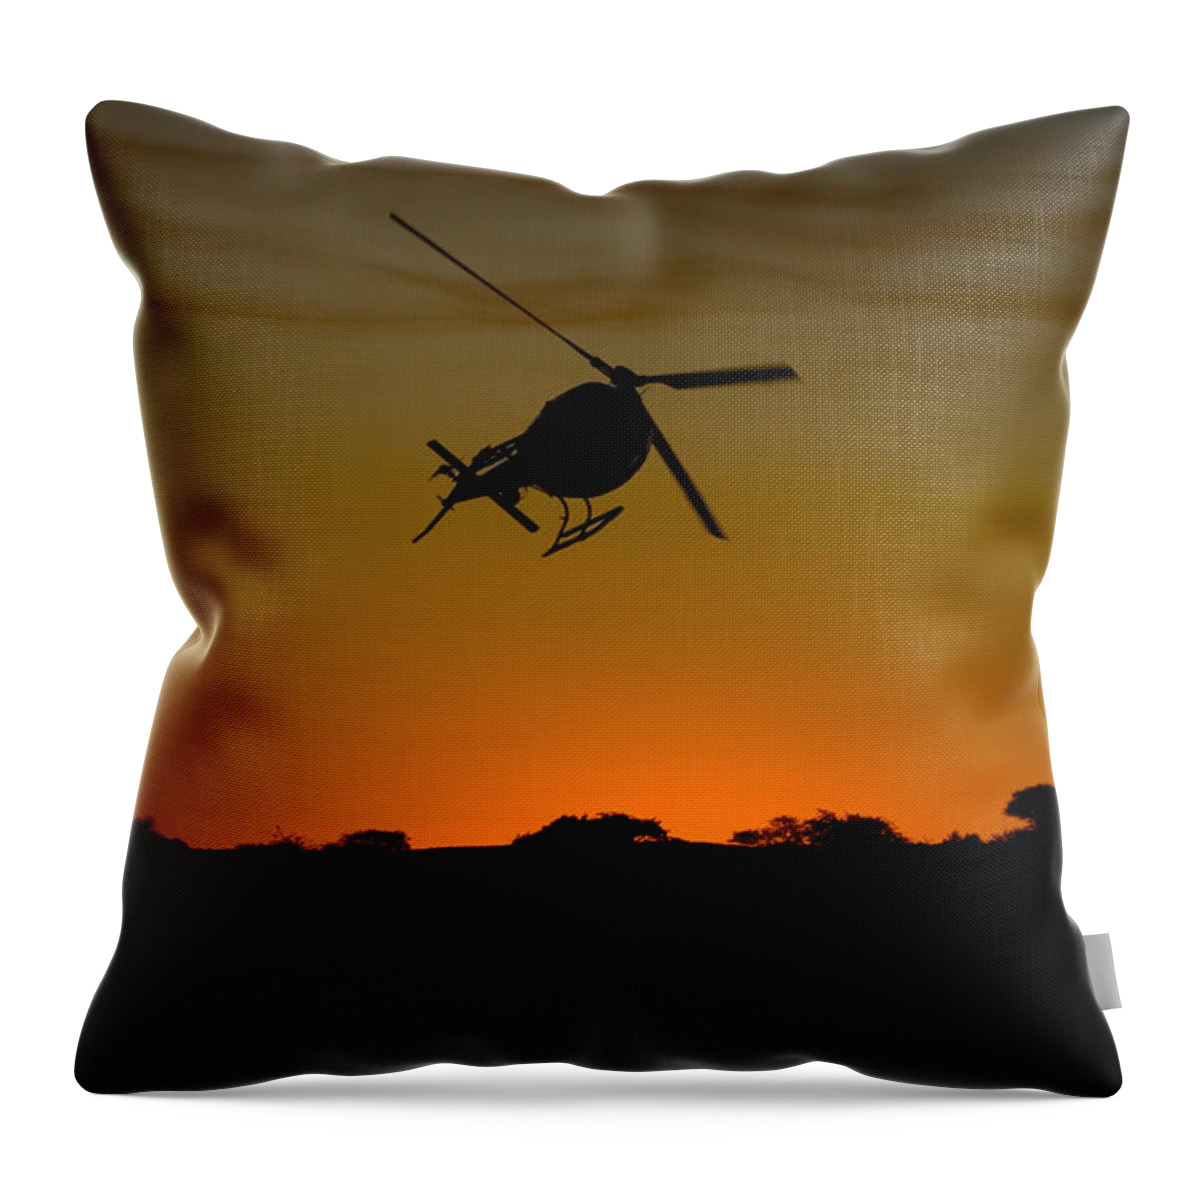 Eurocopter As350 B3 Throw Pillow featuring the photograph Smoke by Paul Job